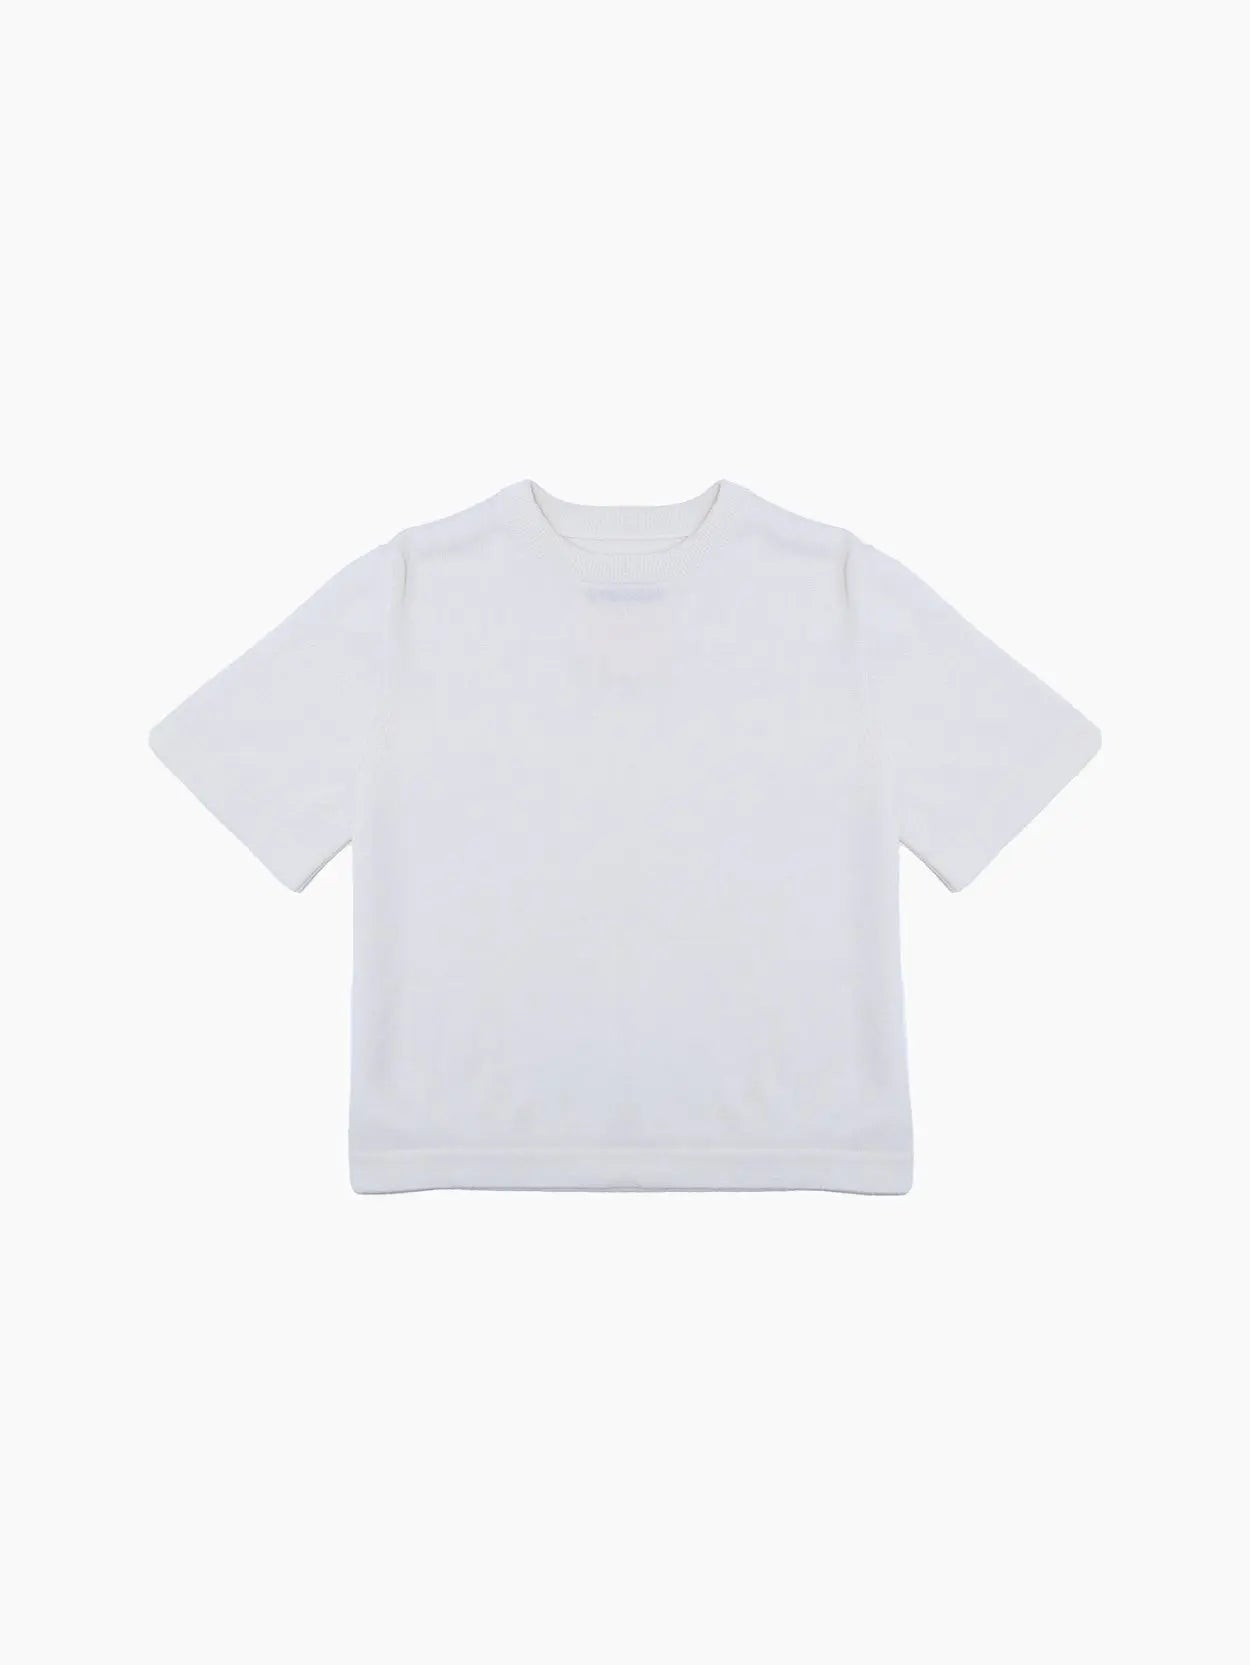 A plain white short-sleeve Merino Wool T-Shirt from Cordera is displayed against a white background. The T-shirt, available at this trendy Barcelona store, features a round neckline and a simple, clean design with no visible logos or patterns.